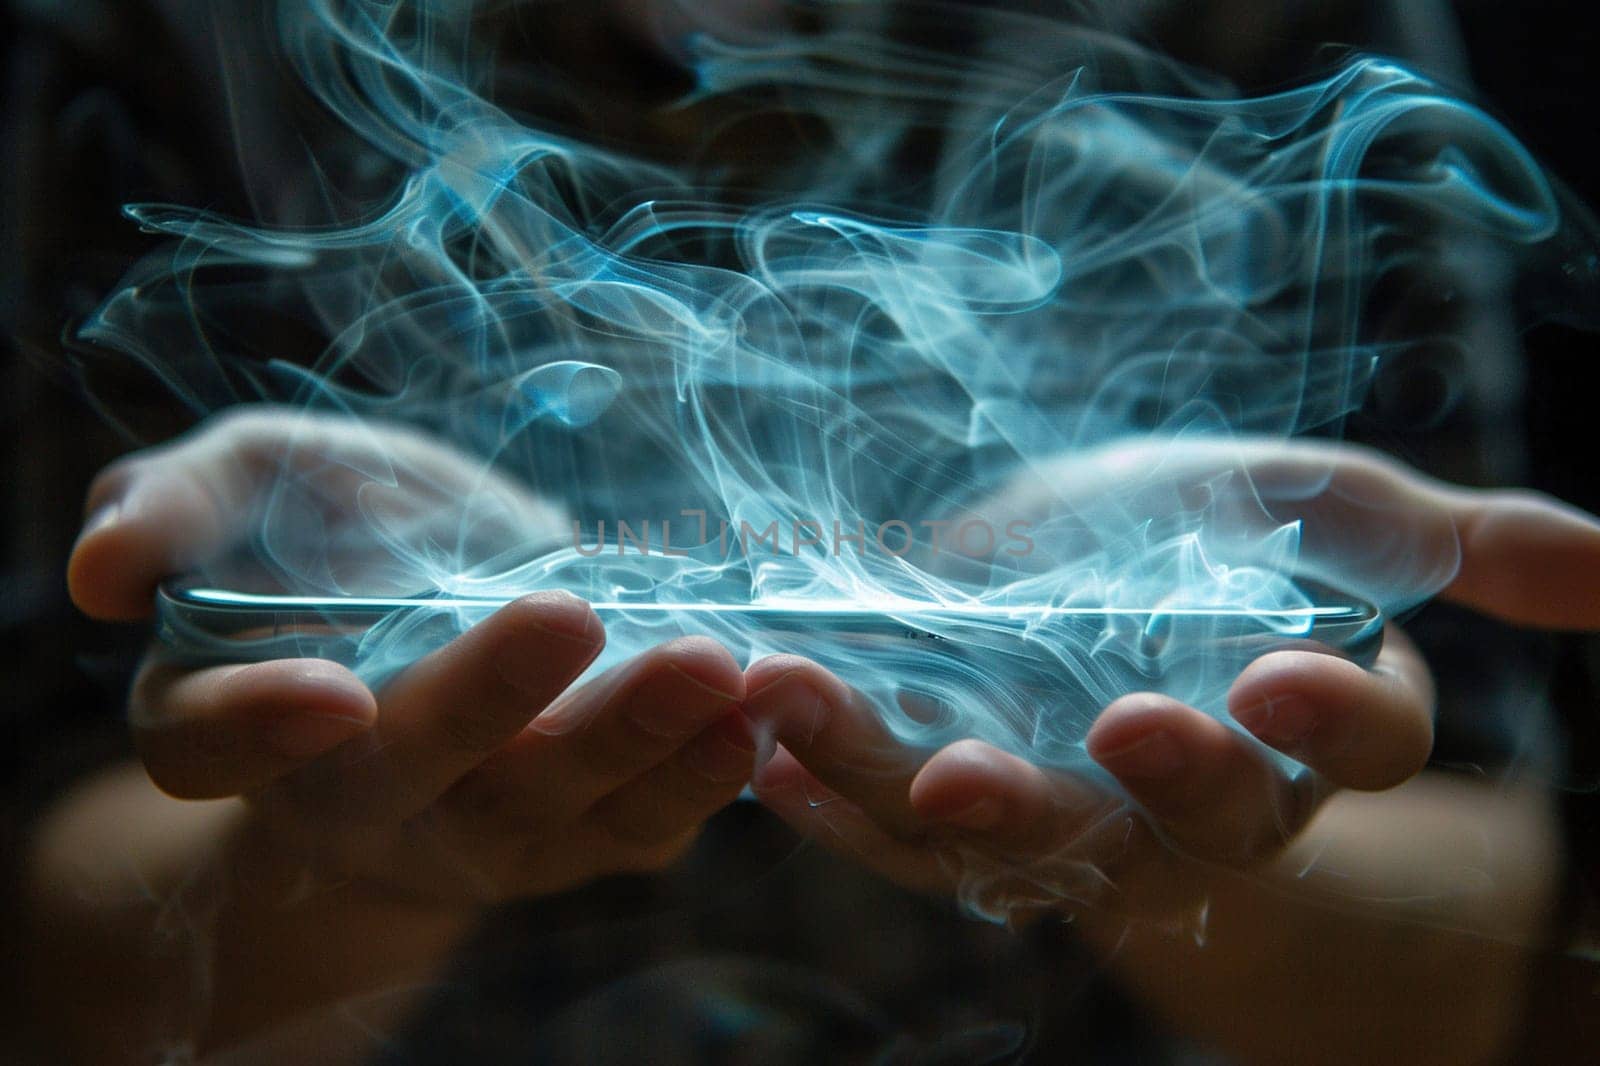 A modern smartphone in a hands in a cloud of smoke on a dark background, close-up.